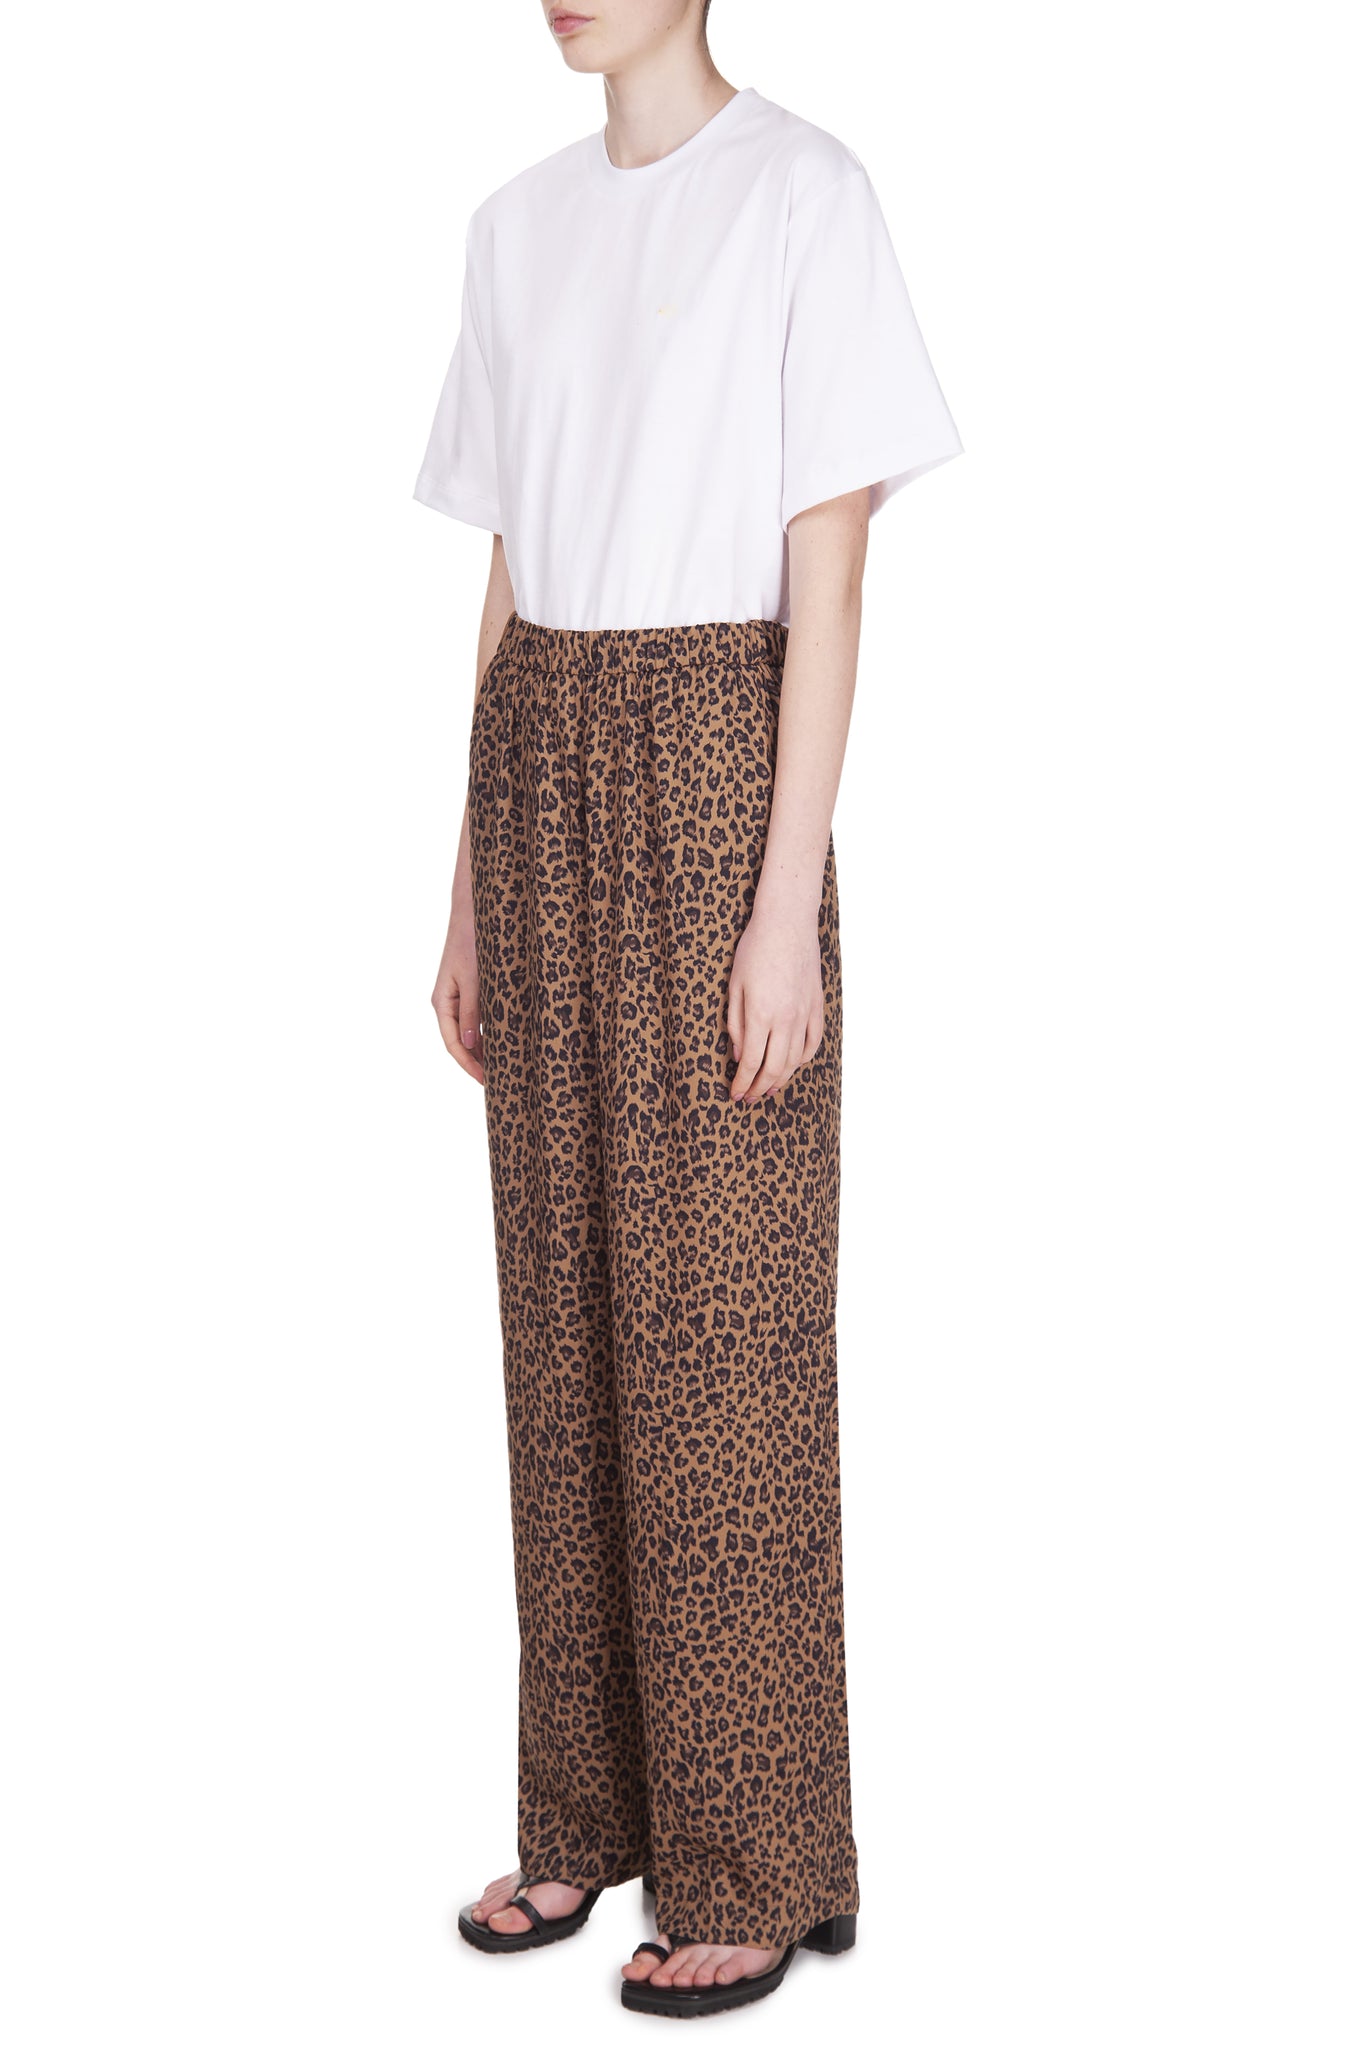 Leopard printed trousers